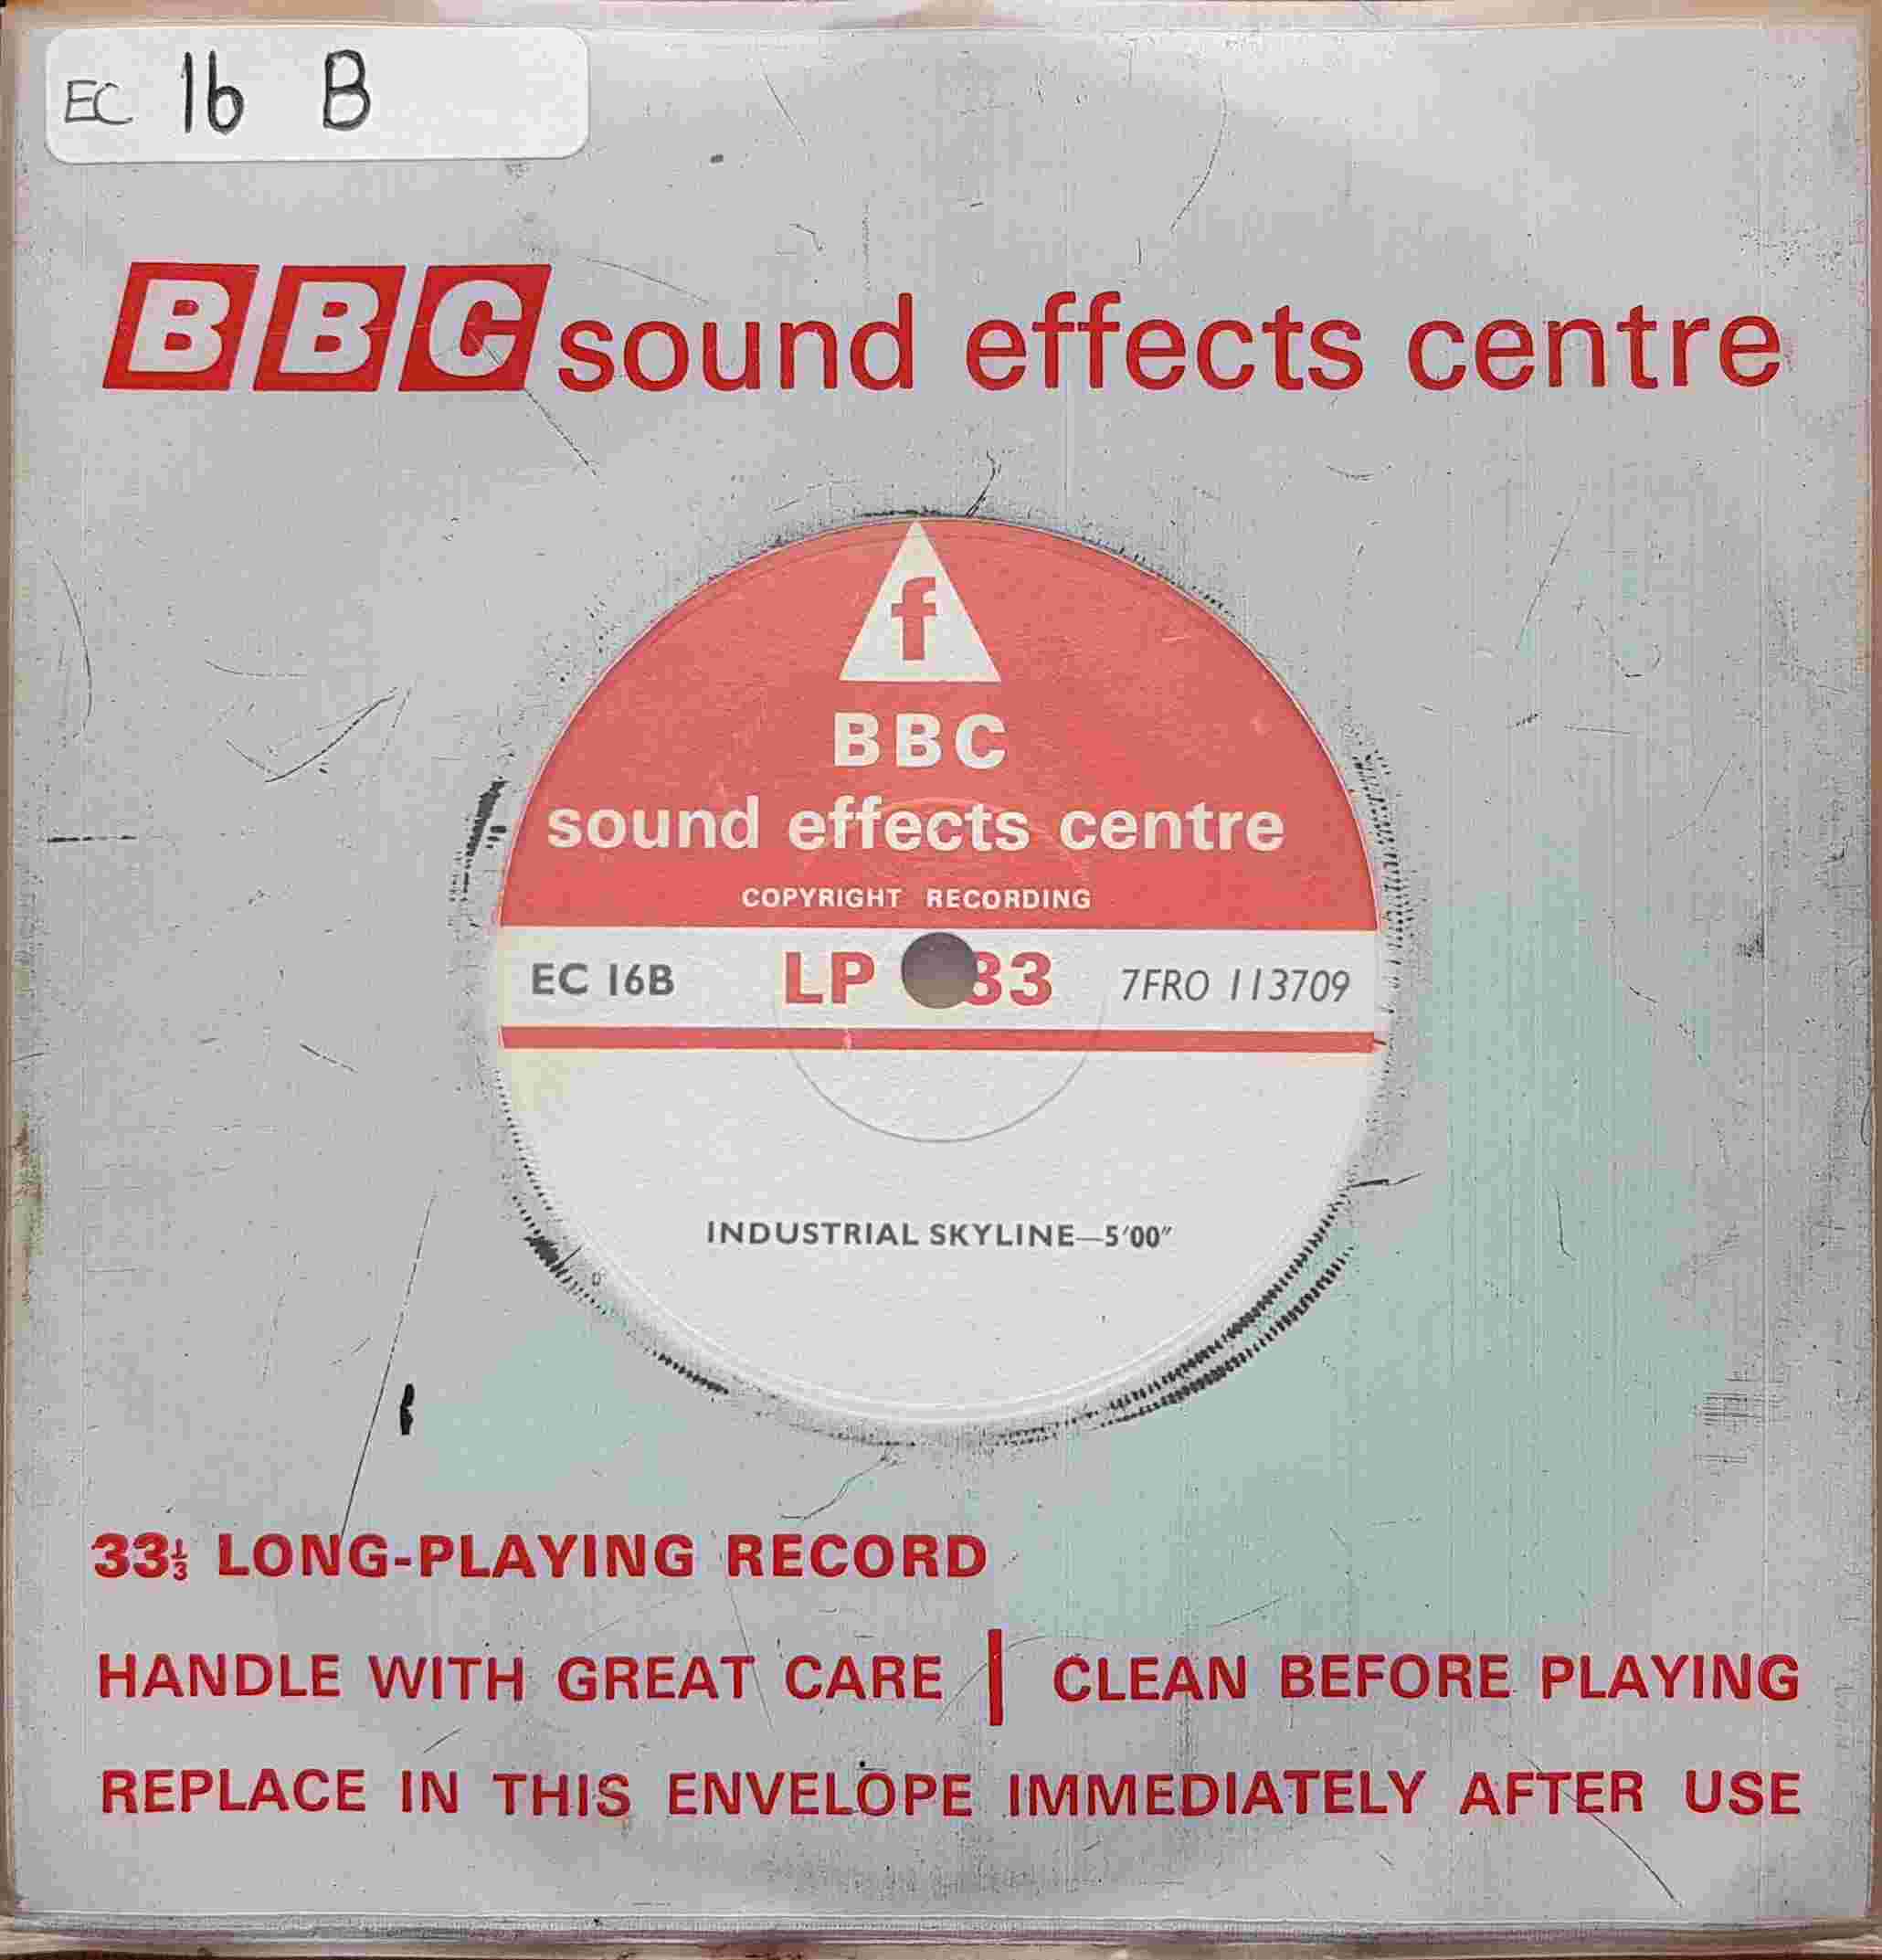 Picture of EC 16B Industrial skyline / Heavy engineering works by artist Not registered from the BBC singles - Records and Tapes library